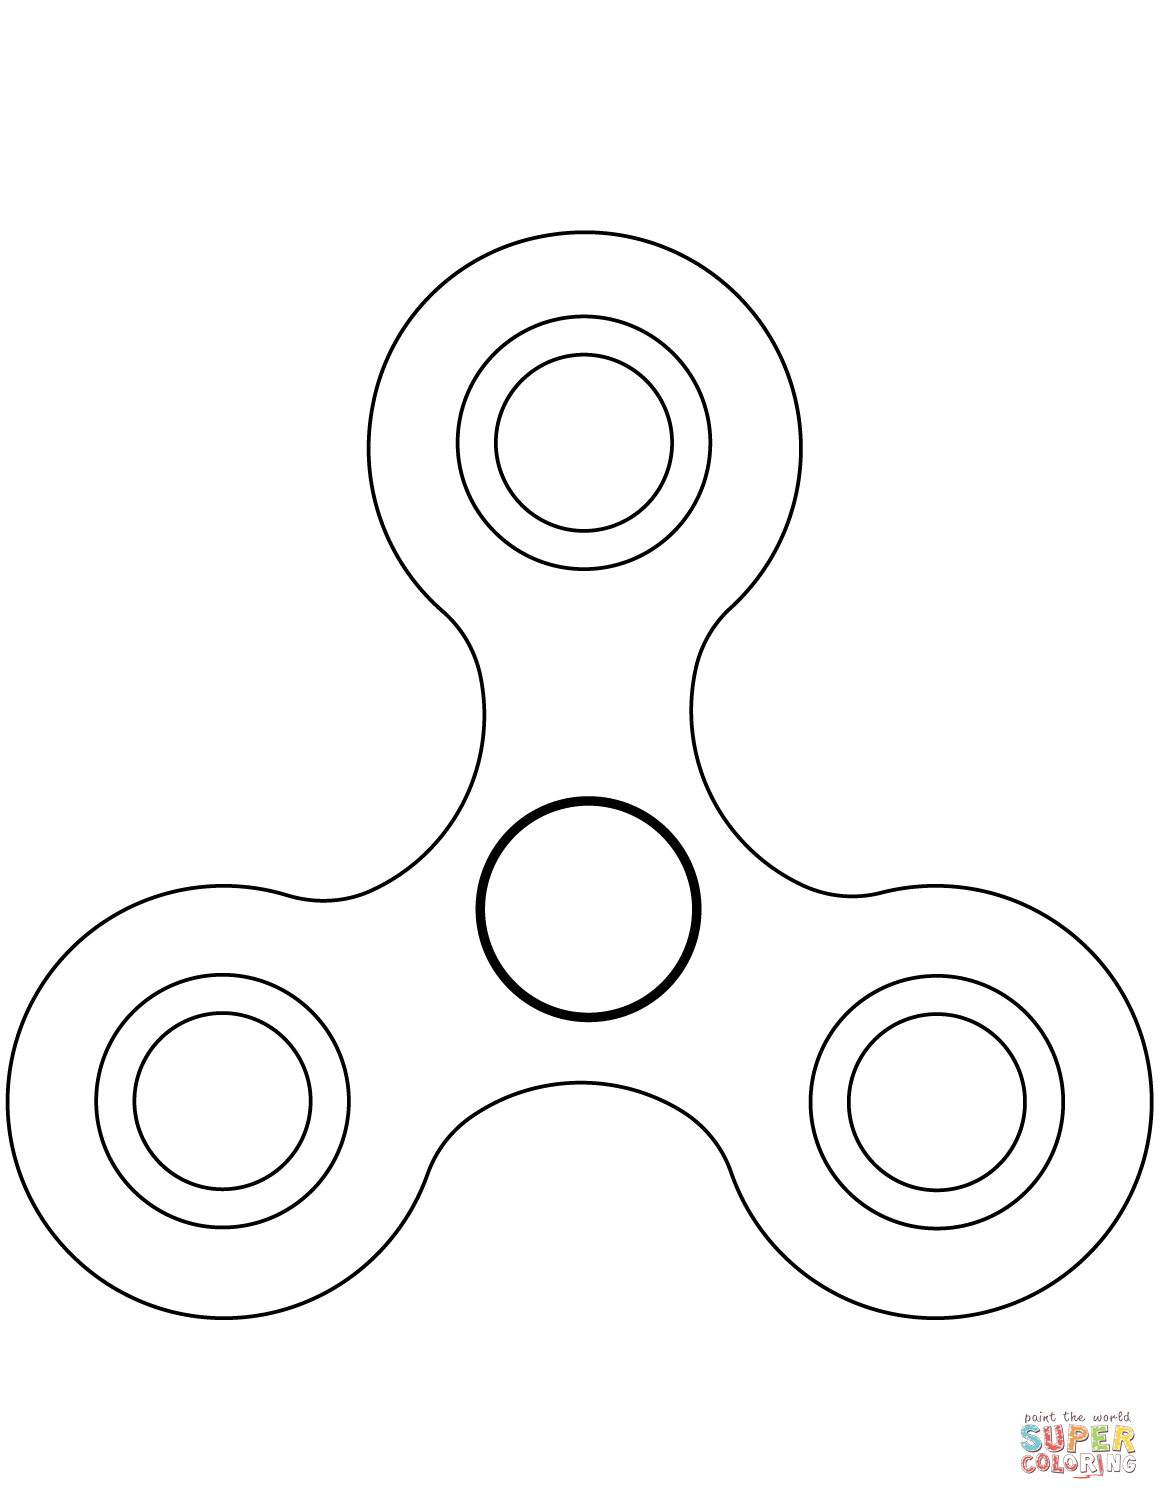 Fidget Spinner coloring page | Free Printable Coloring Pages